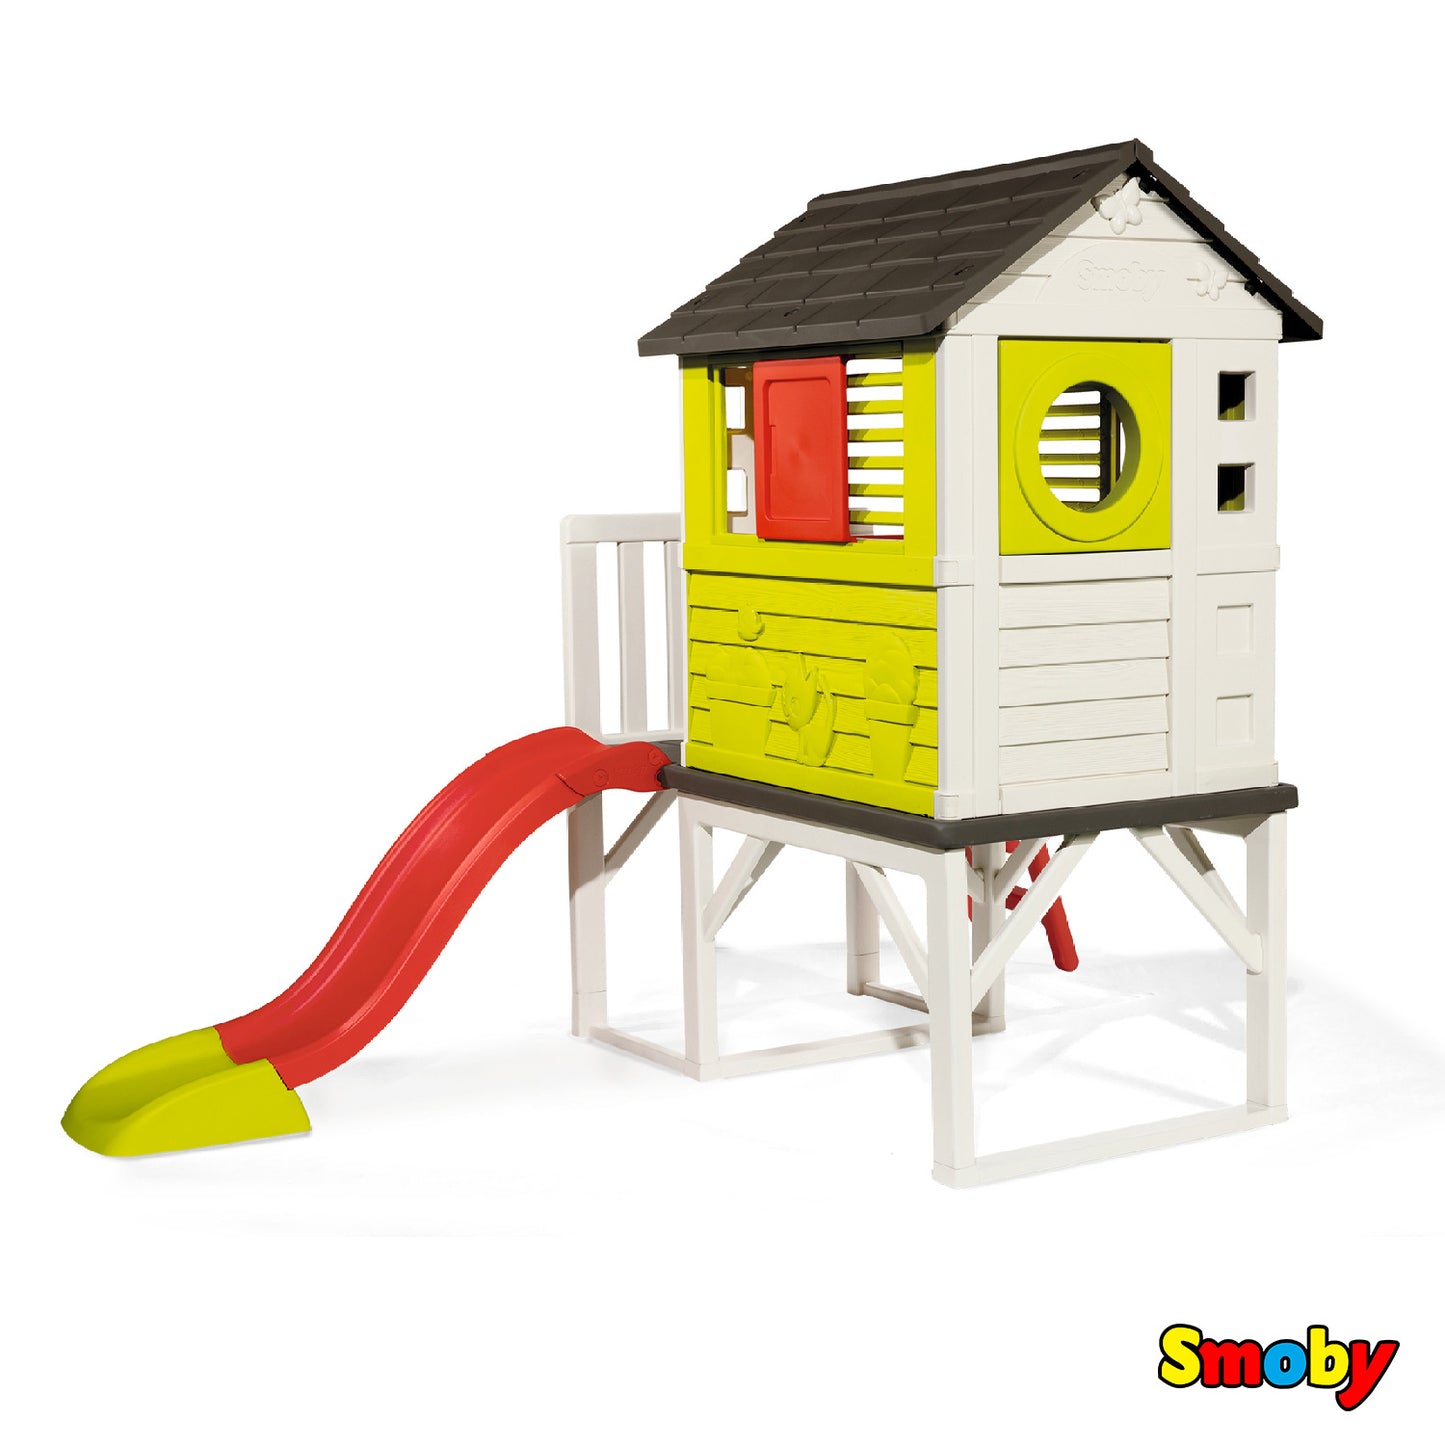 Smoby - Small house on stilts